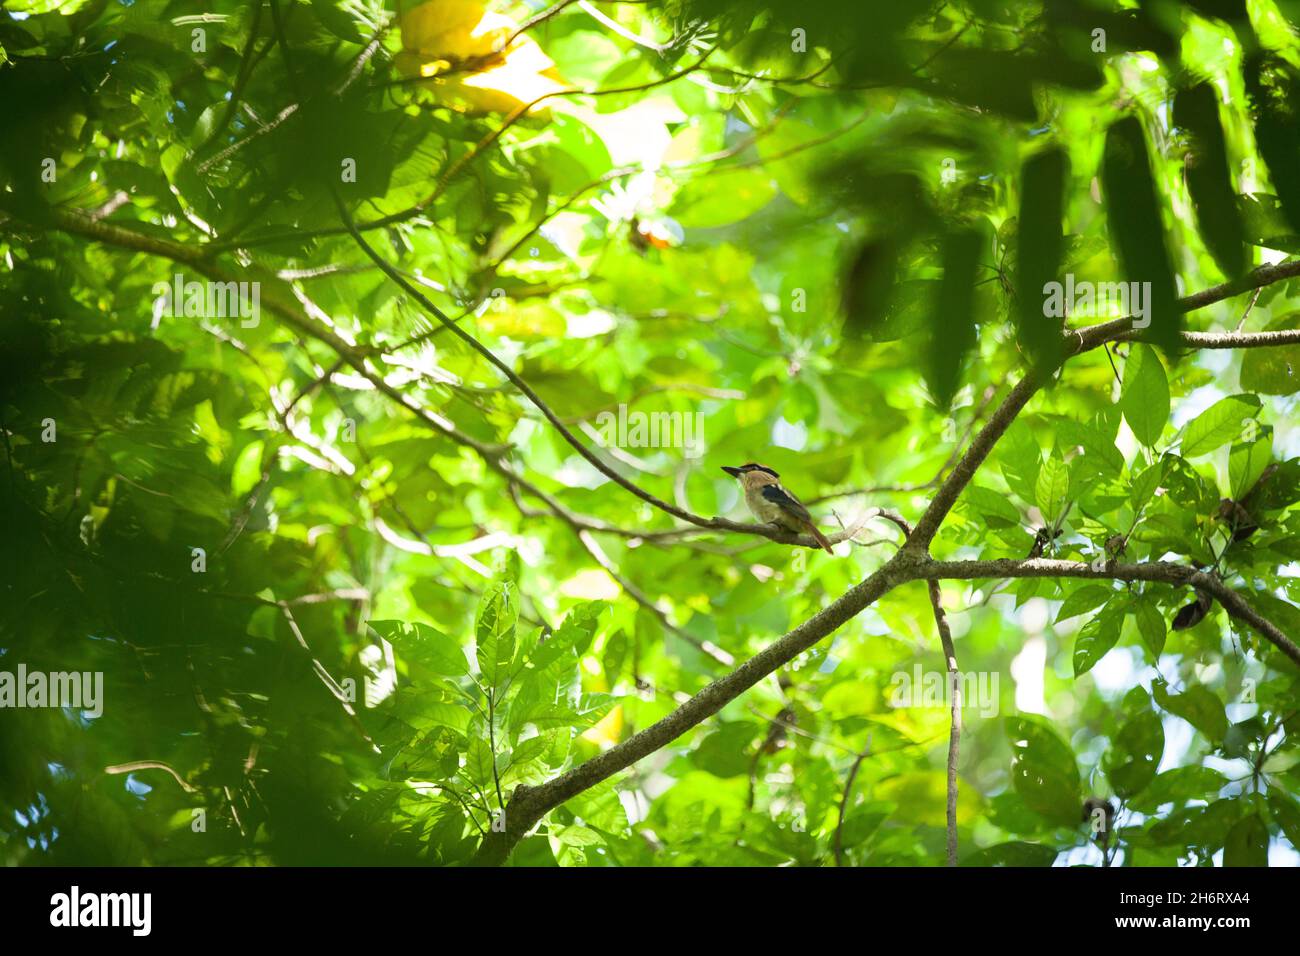 Tiny bird sits in the colorful foliage of the rainforest Stock Photo